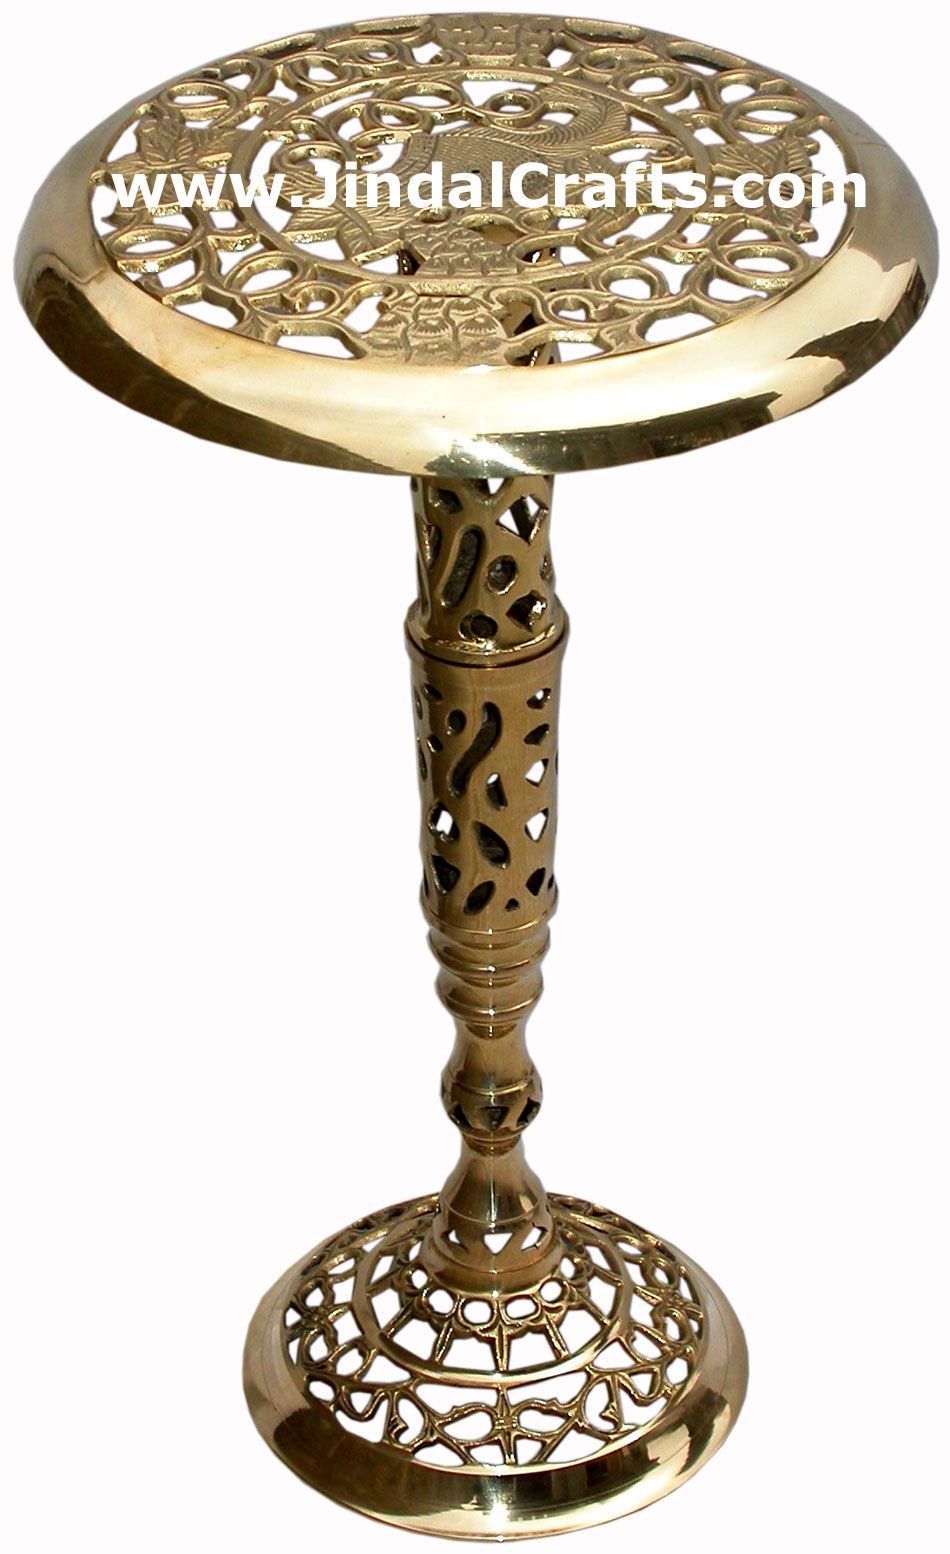 Brass Made Adjustable Folding Ottoman Stool Traditional Design from India Art